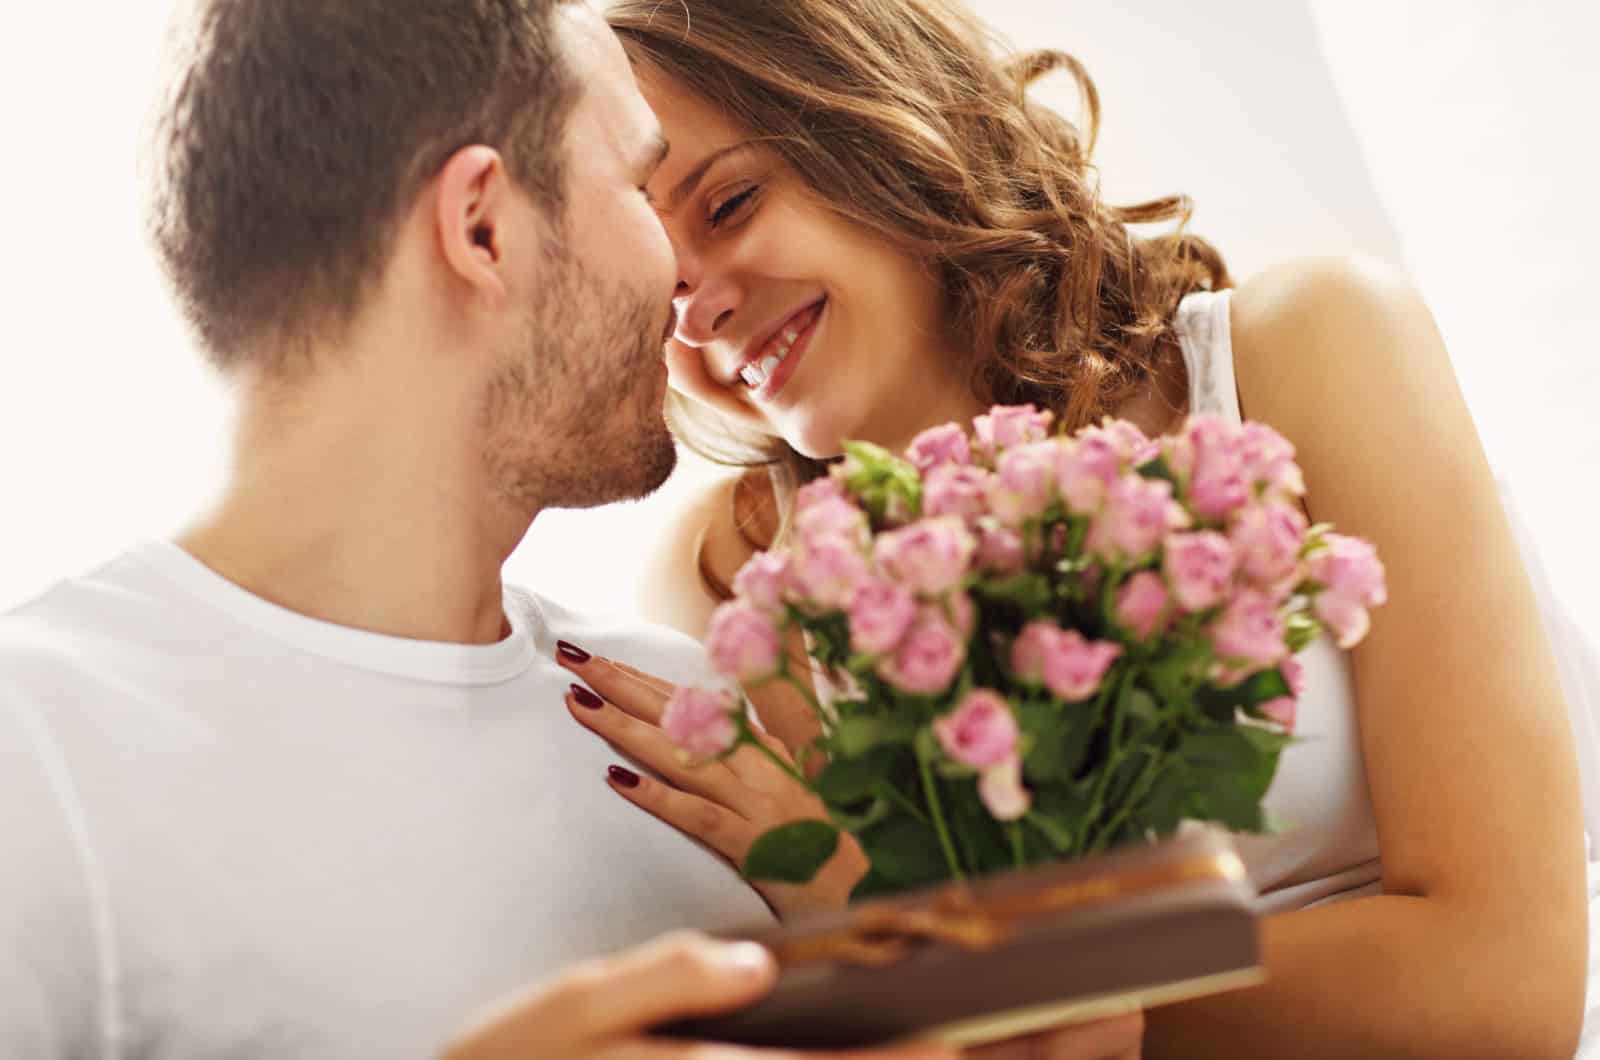 man giving flowers to his girlfriend